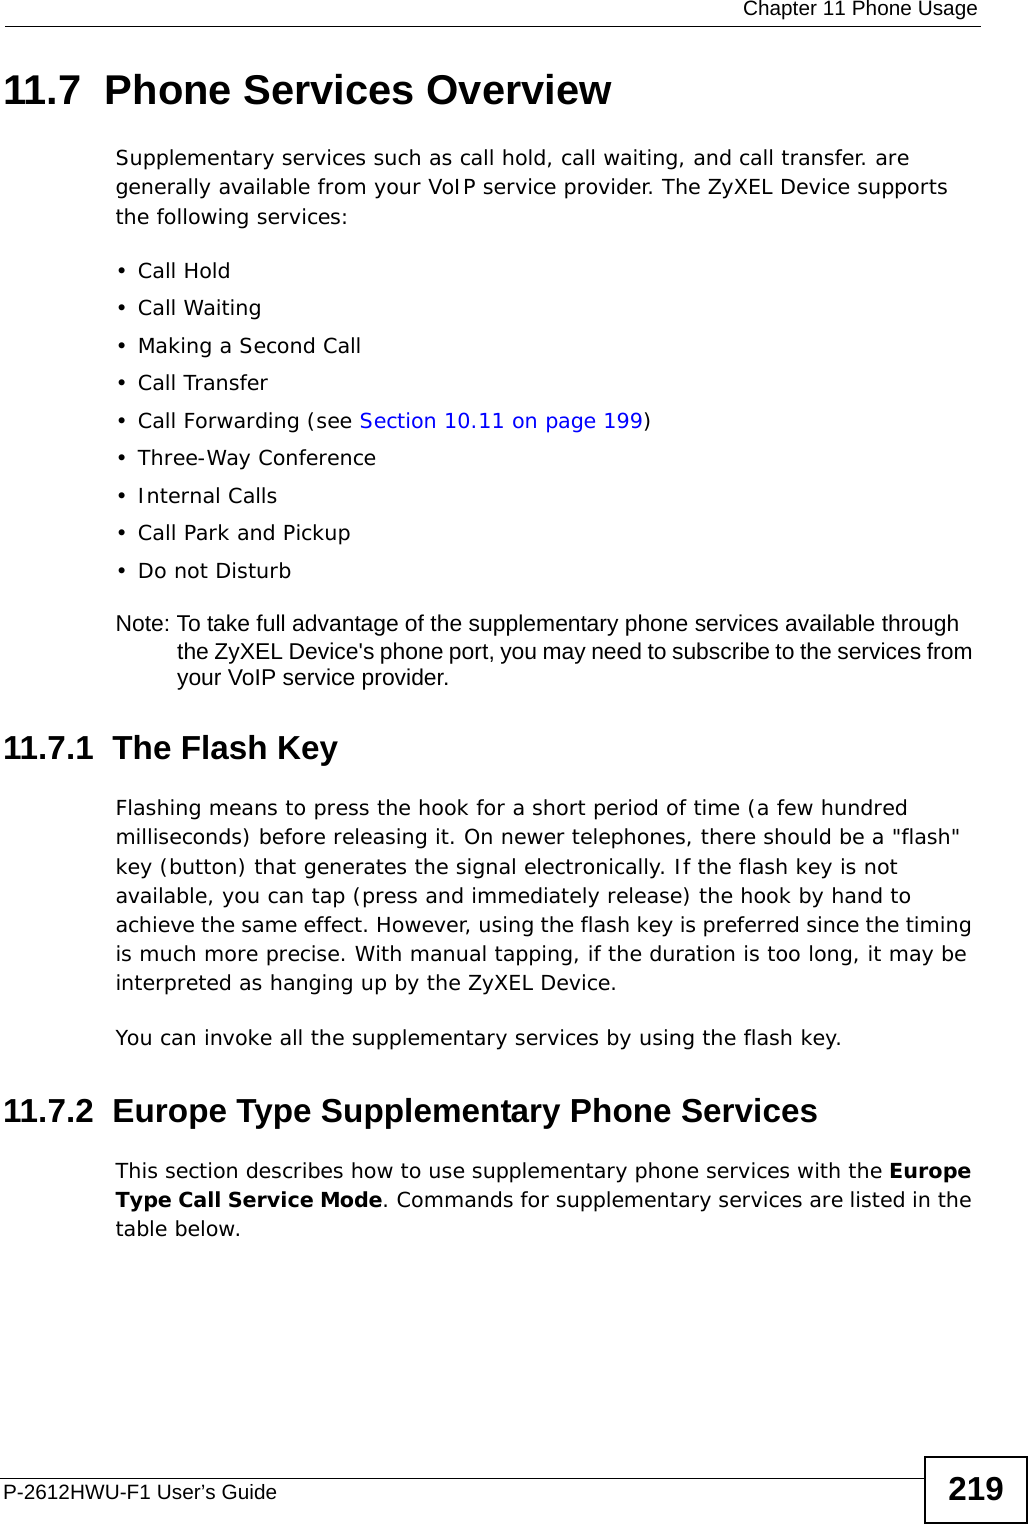  Chapter 11 Phone UsageP-2612HWU-F1 User’s Guide 21911.7  Phone Services OverviewSupplementary services such as call hold, call waiting, and call transfer. are generally available from your VoIP service provider. The ZyXEL Device supports the following services:• Call Hold• Call Waiting• Making a Second Call• Call Transfer• Call Forwarding (see Section 10.11 on page 199)• Three-Way Conference•Internal Calls• Call Park and Pickup•Do not DisturbNote: To take full advantage of the supplementary phone services available through the ZyXEL Device&apos;s phone port, you may need to subscribe to the services from your VoIP service provider.11.7.1  The Flash KeyFlashing means to press the hook for a short period of time (a few hundred milliseconds) before releasing it. On newer telephones, there should be a &quot;flash&quot; key (button) that generates the signal electronically. If the flash key is not available, you can tap (press and immediately release) the hook by hand to achieve the same effect. However, using the flash key is preferred since the timing is much more precise. With manual tapping, if the duration is too long, it may be interpreted as hanging up by the ZyXEL Device.You can invoke all the supplementary services by using the flash key. 11.7.2  Europe Type Supplementary Phone ServicesThis section describes how to use supplementary phone services with the Europe Type Call Service Mode. Commands for supplementary services are listed in the table below.